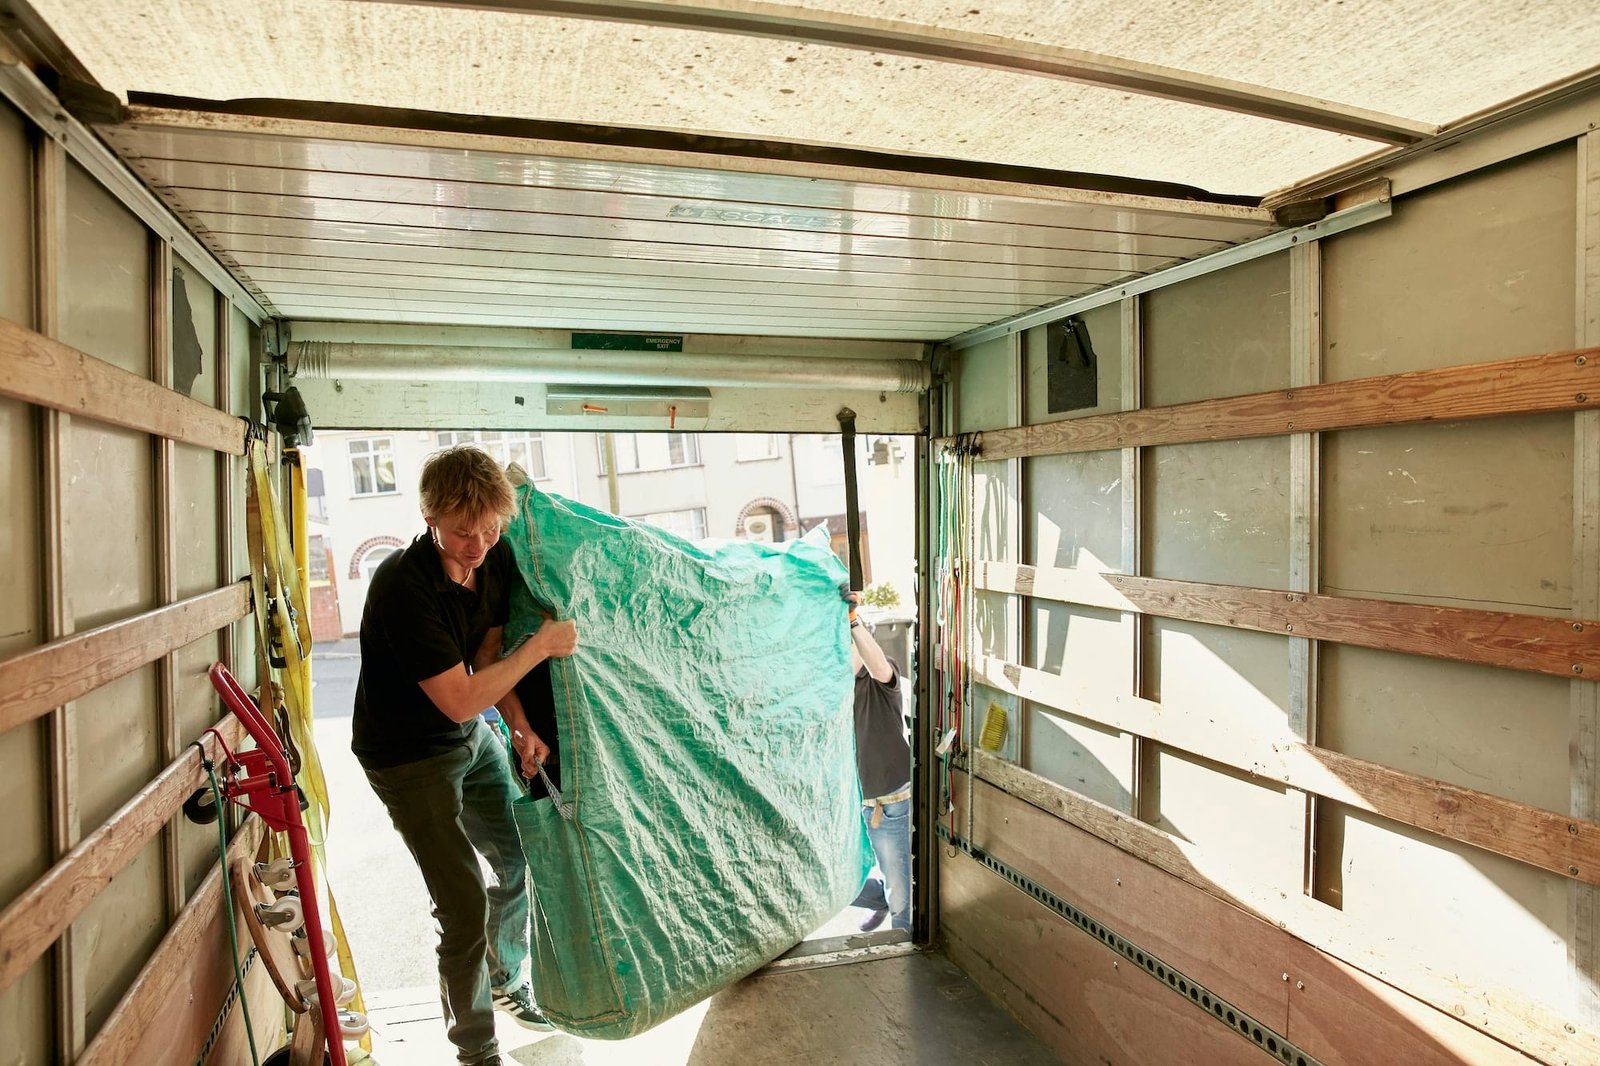 Removals business A man lifting an item of furniture covered in green plastic into a removals van